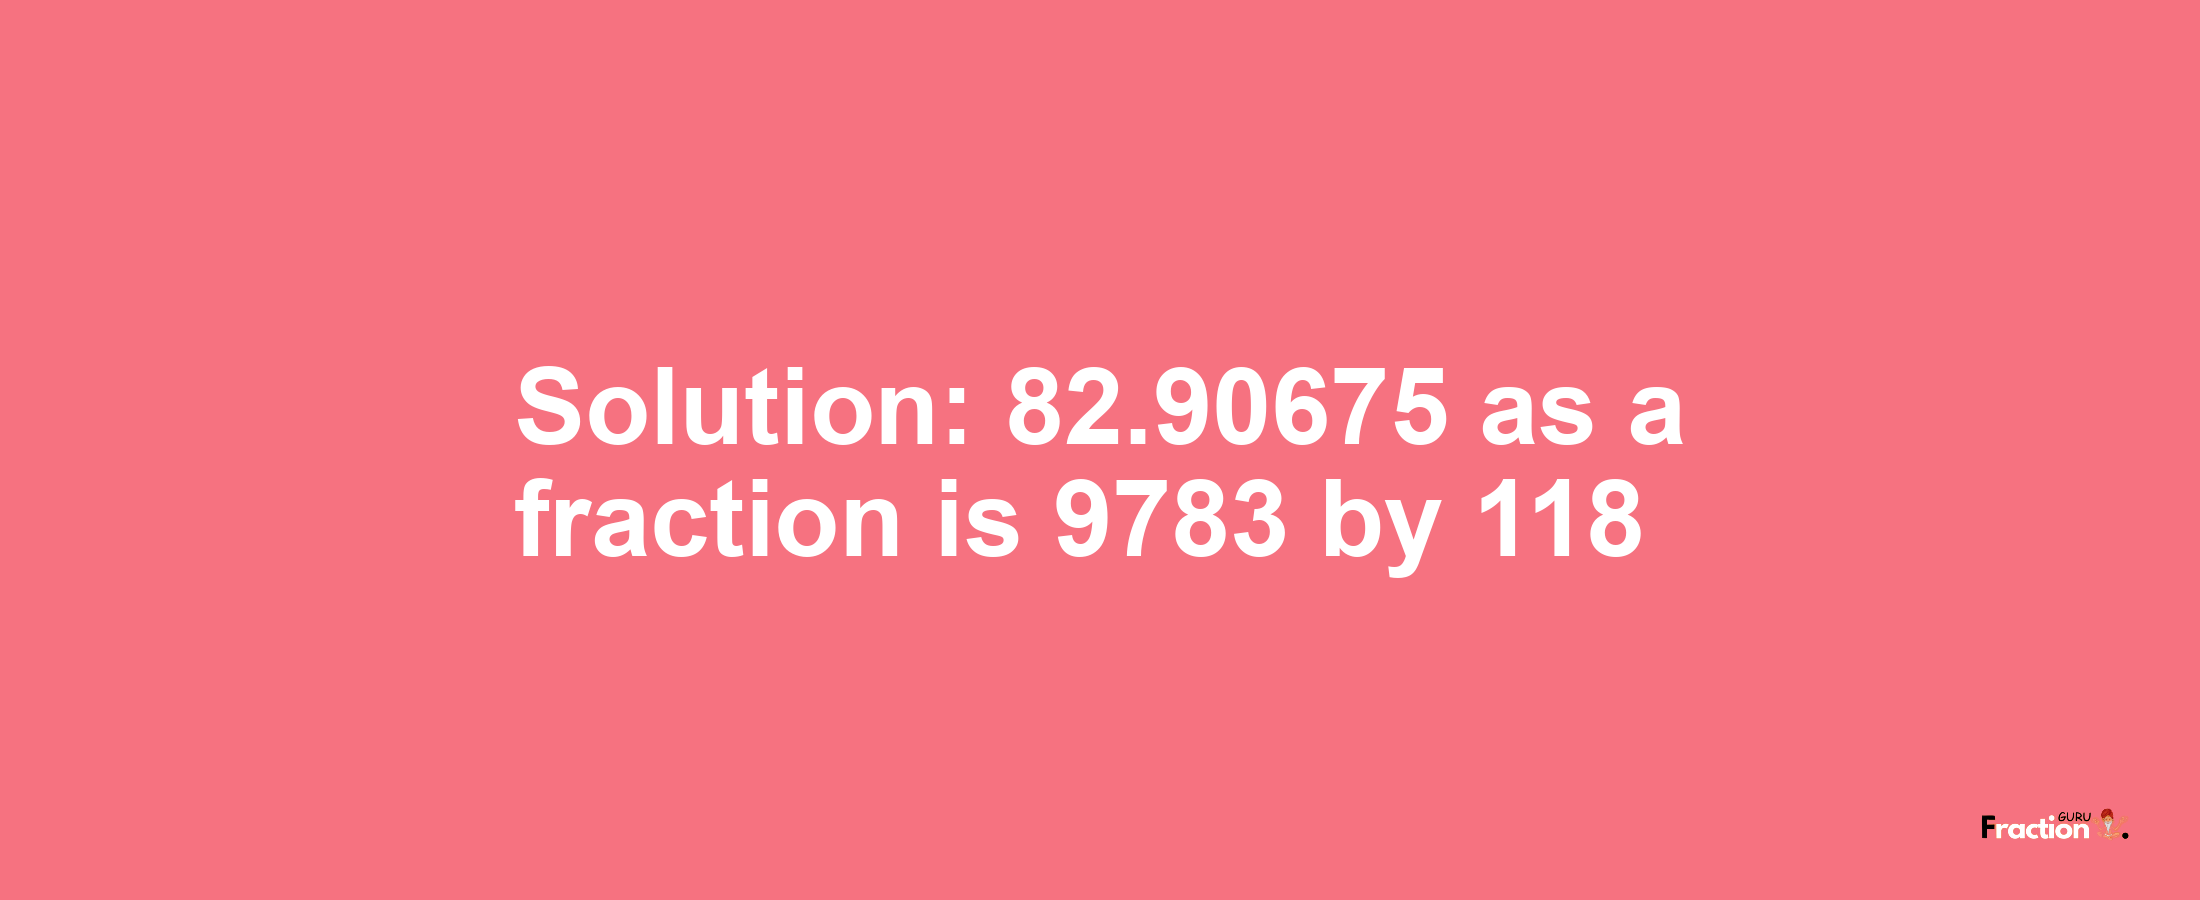 Solution:82.90675 as a fraction is 9783/118